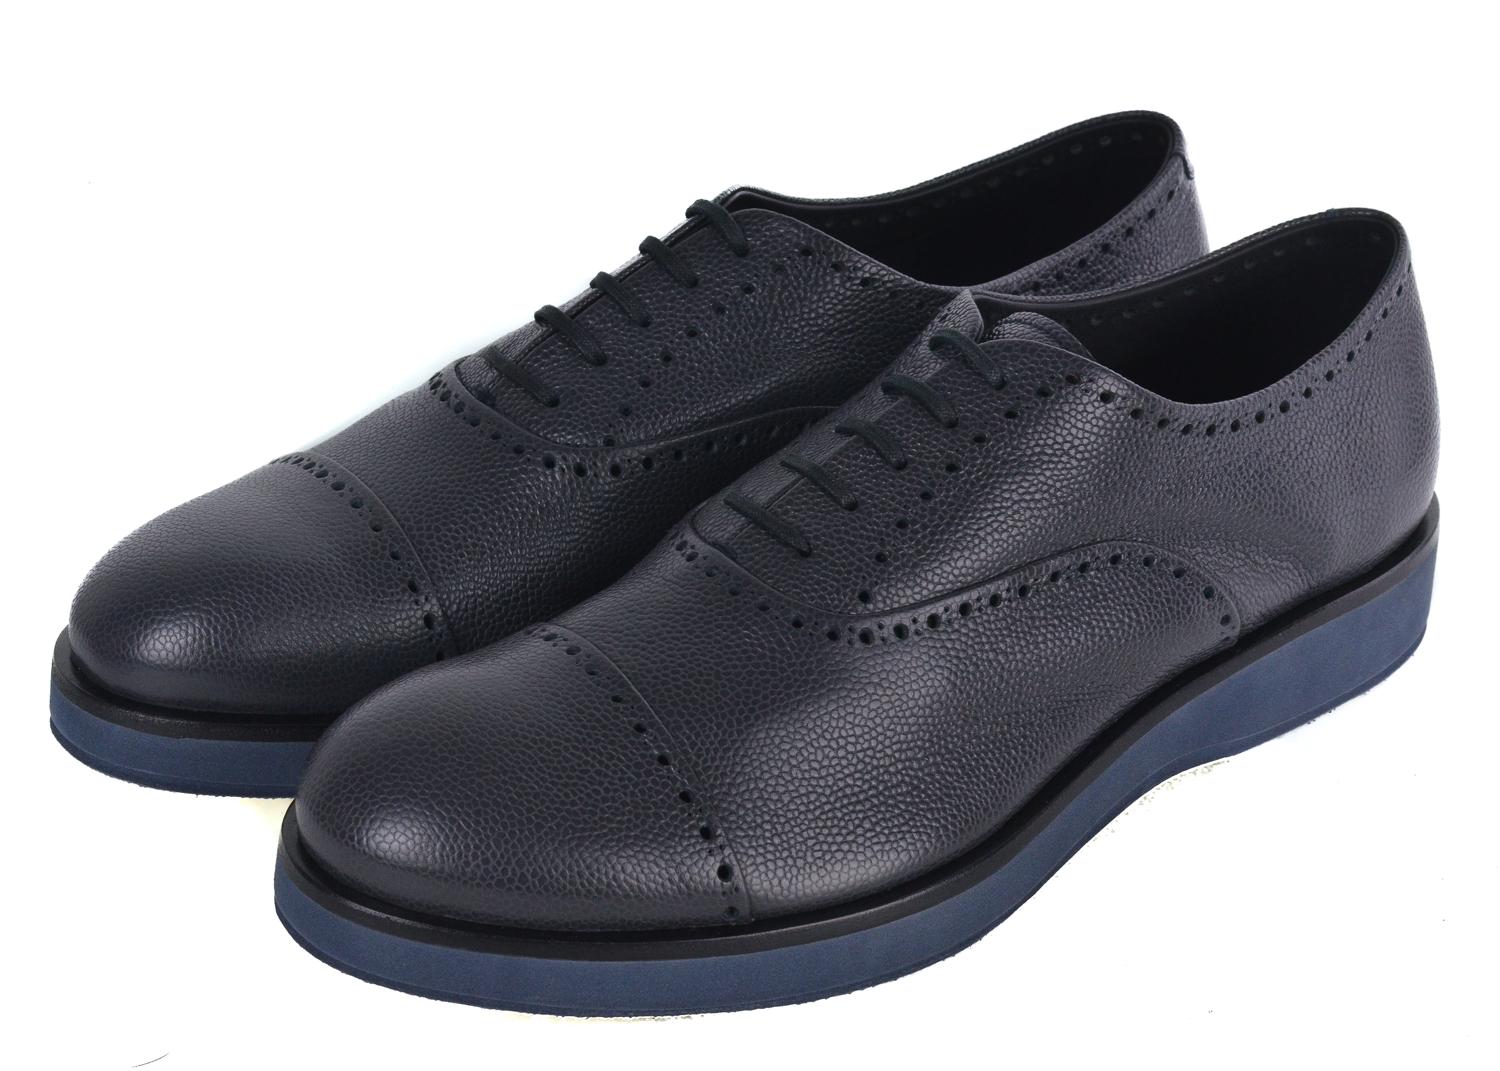 Add the sophistication of step to any beat with your Emporio Armani leather Brogues. These modern classics feature a new artistic update in comparison to your nostalgic pair. These shoe feature grey grained polished leather, minimal brogue patter,